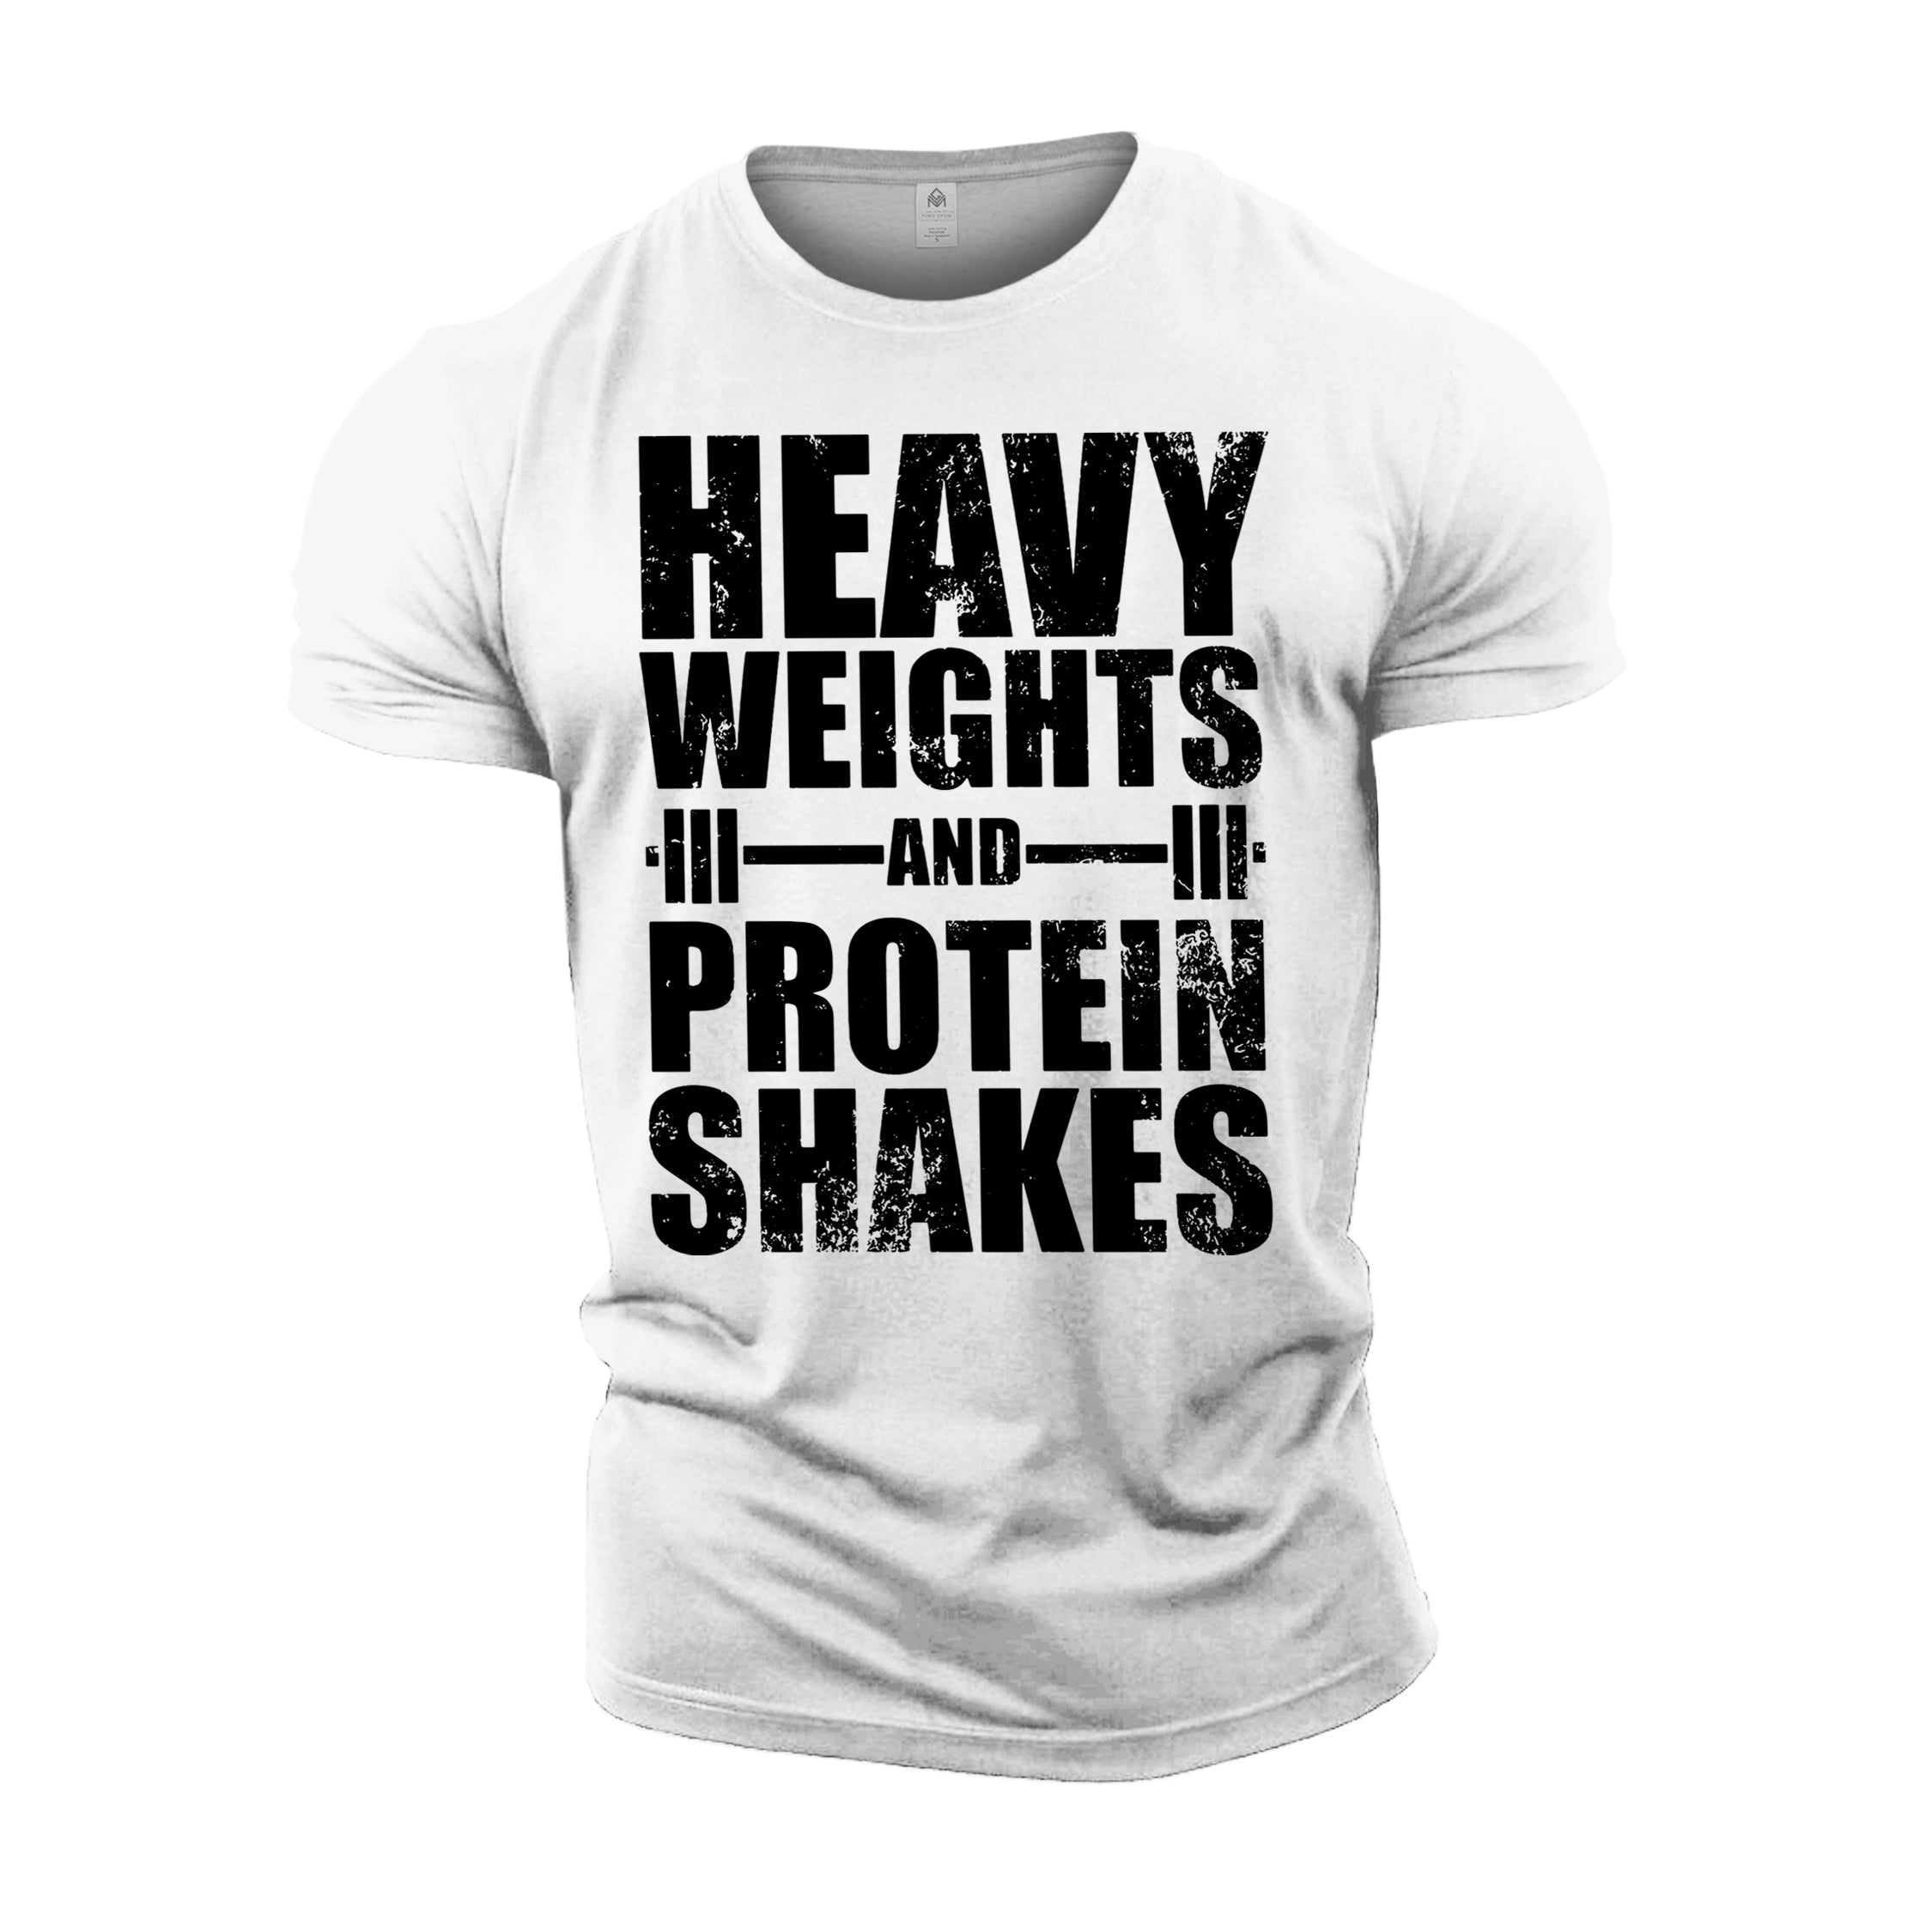 Heavy Weights and Protein Shakes - Gym T-Shirt